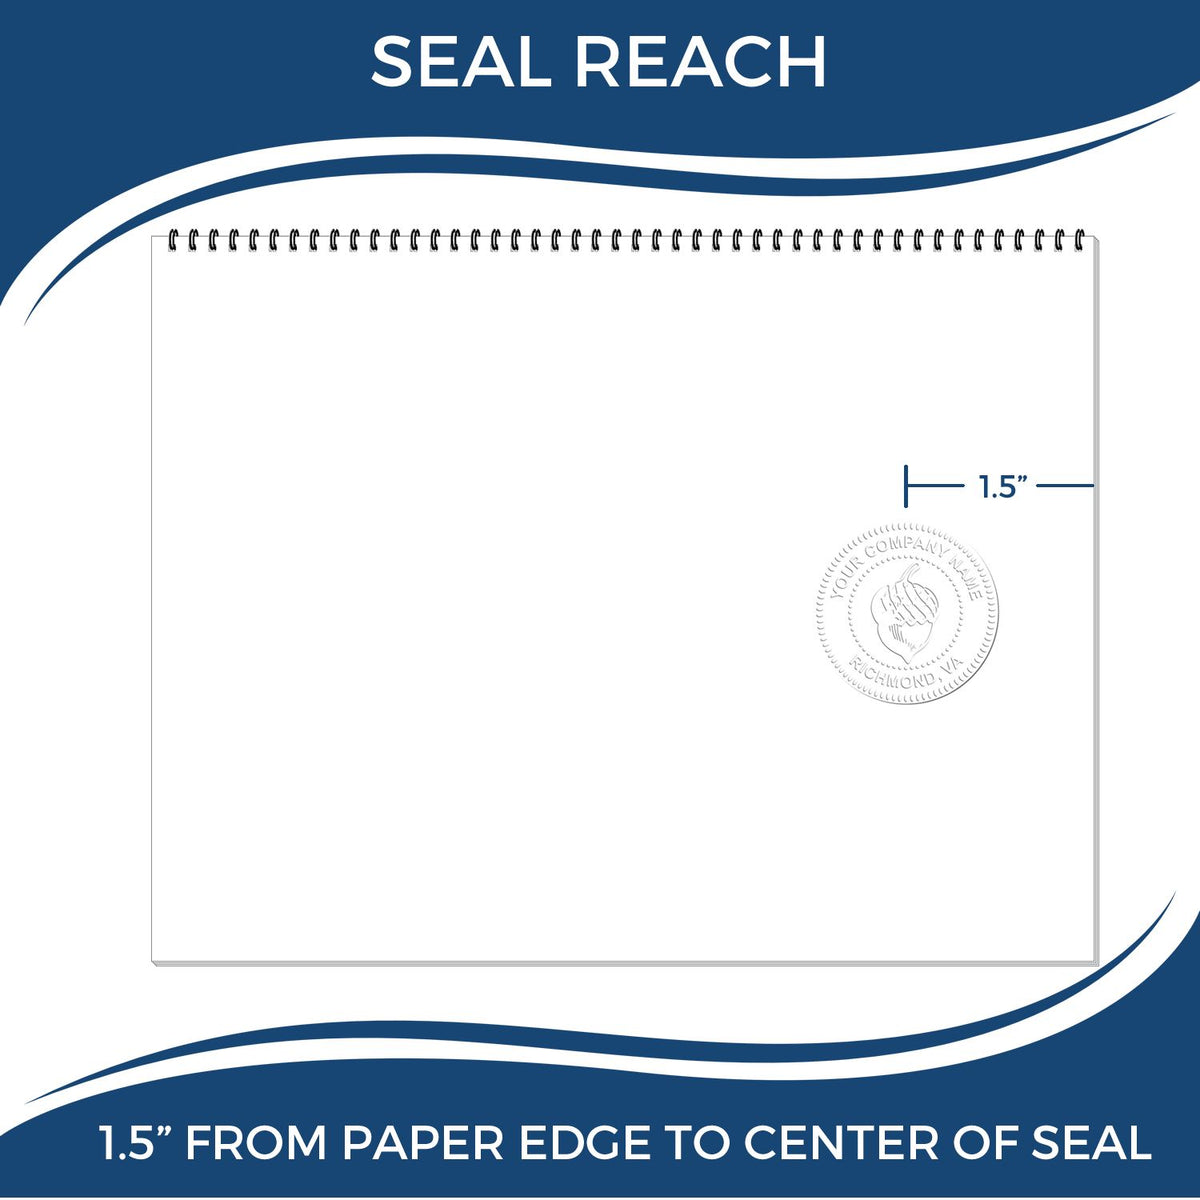 An infographic showing the seal reach which is represented by a ruler and a miniature seal image of the Handheld Nevada Professional Geologist Embosser